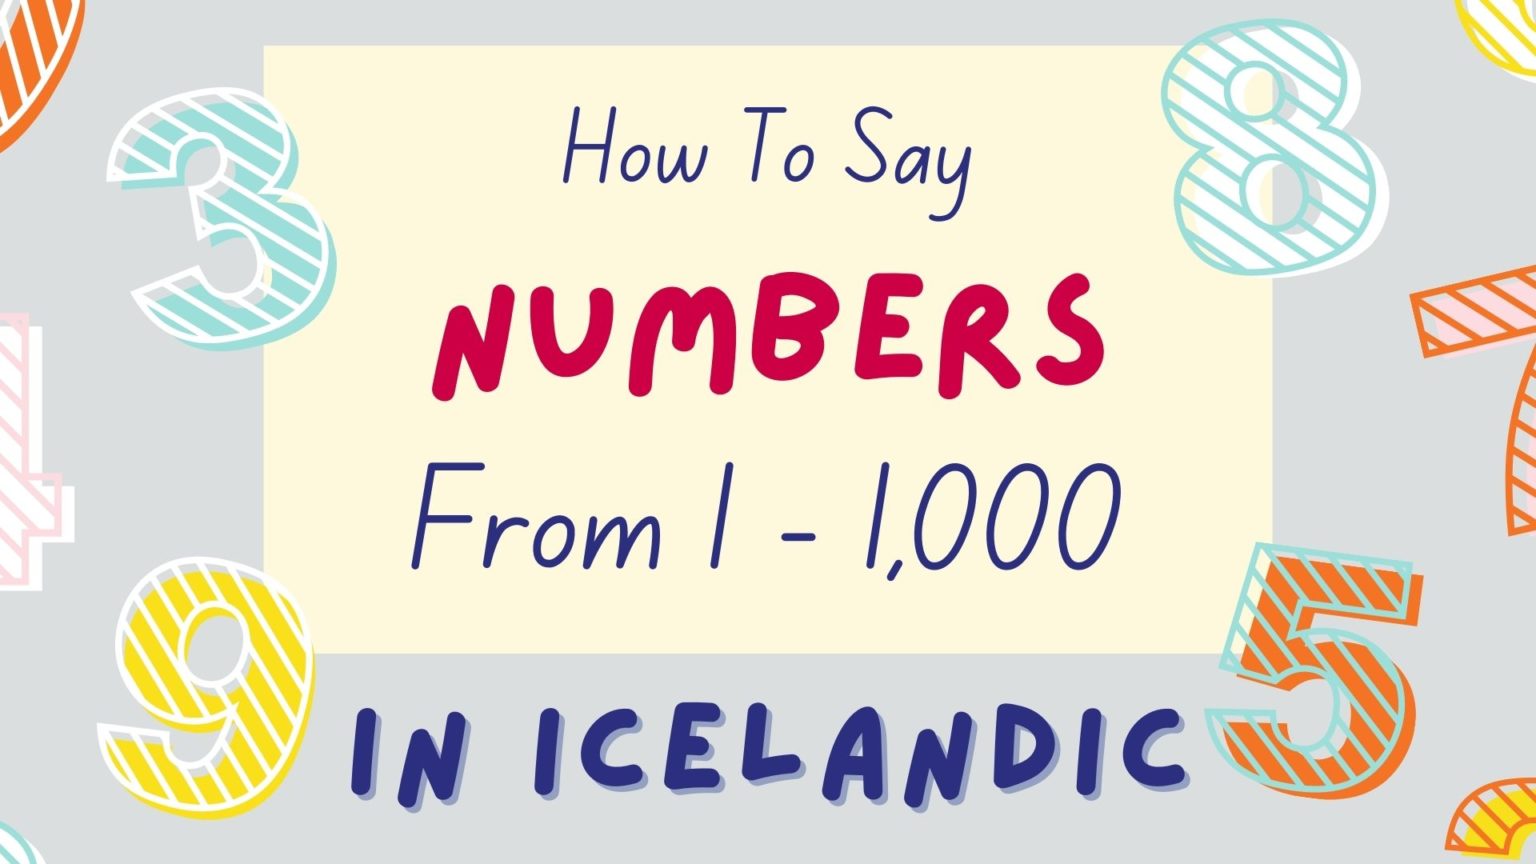 numbers-in-icelandic-from-1-to-1000-how-to-count-in-icelandic-lingalot